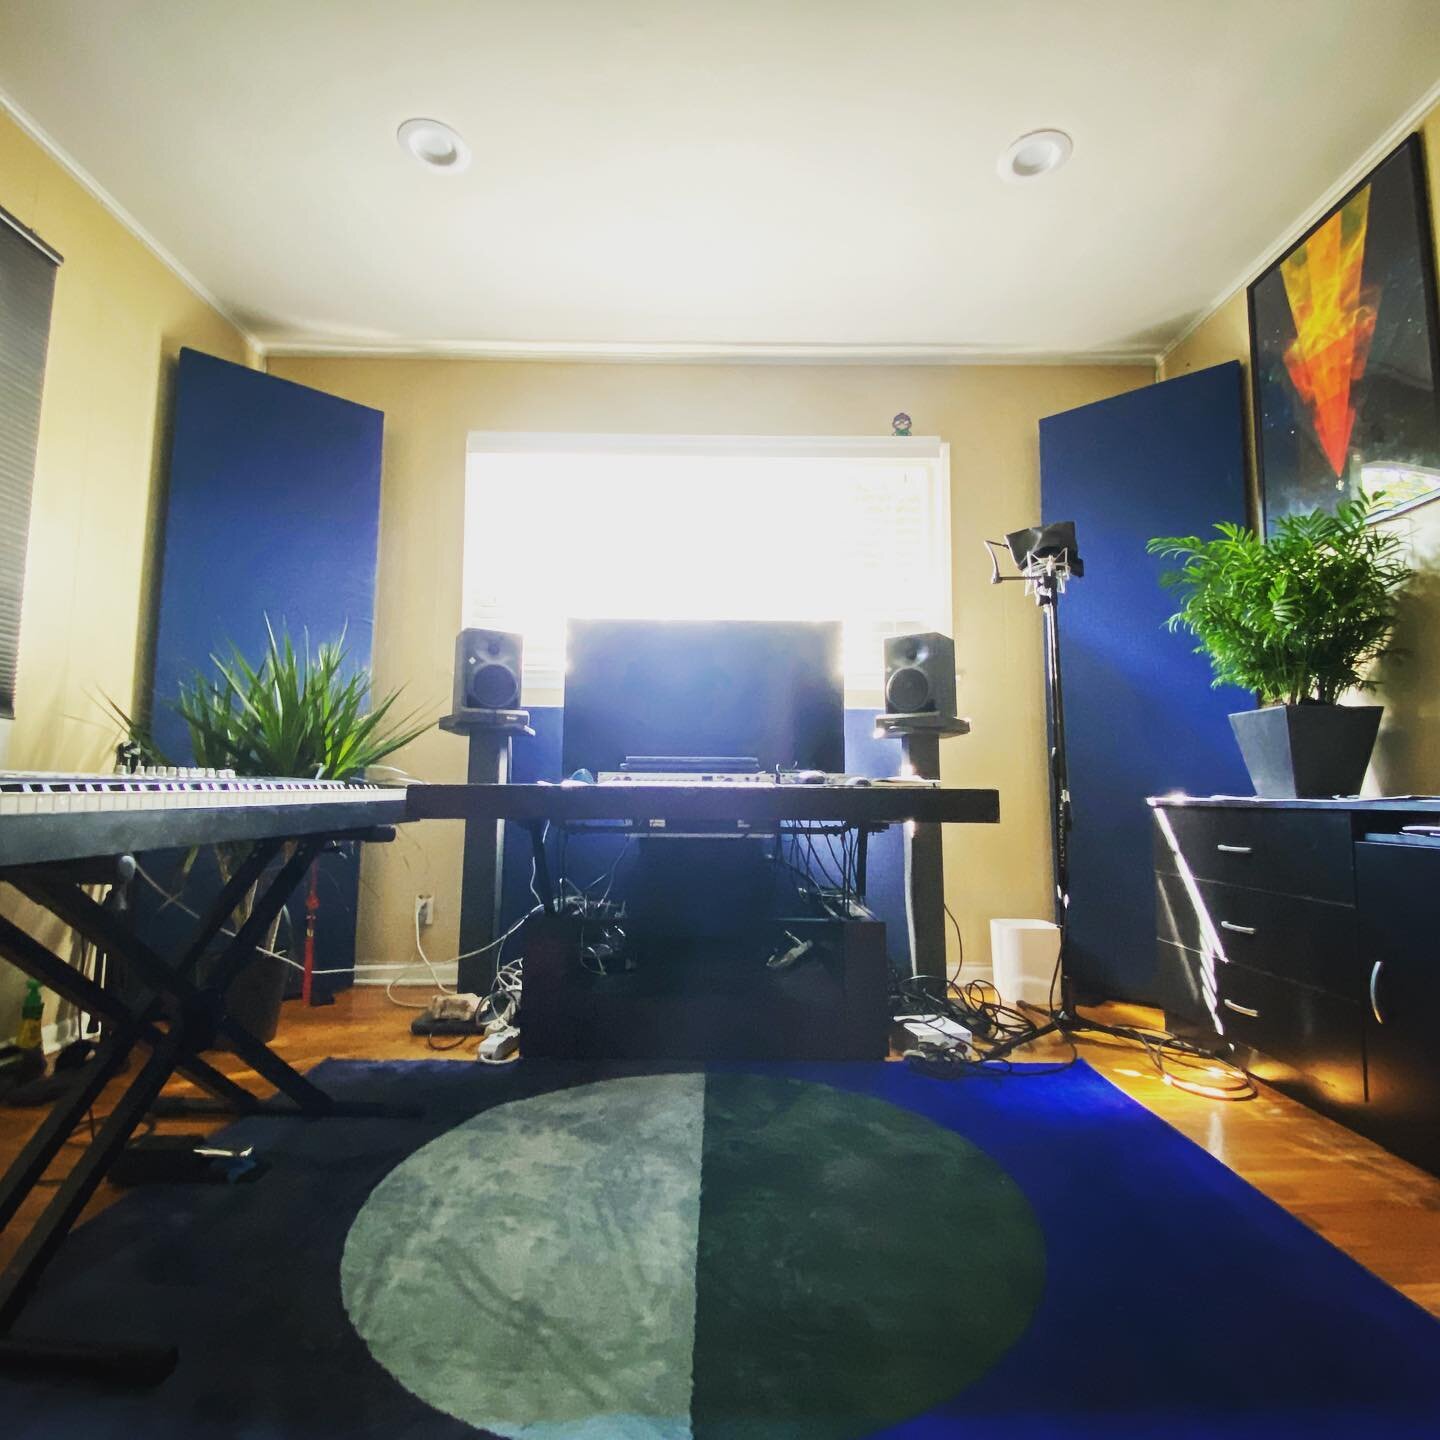 🟦 Slowly getting setup in my new spot here in LA. I moved out of my last real studio space about a year ago and only started acquiring new gear very recently. Been loving getting into the blue color scheme again. What else does this room need?
.
.
.